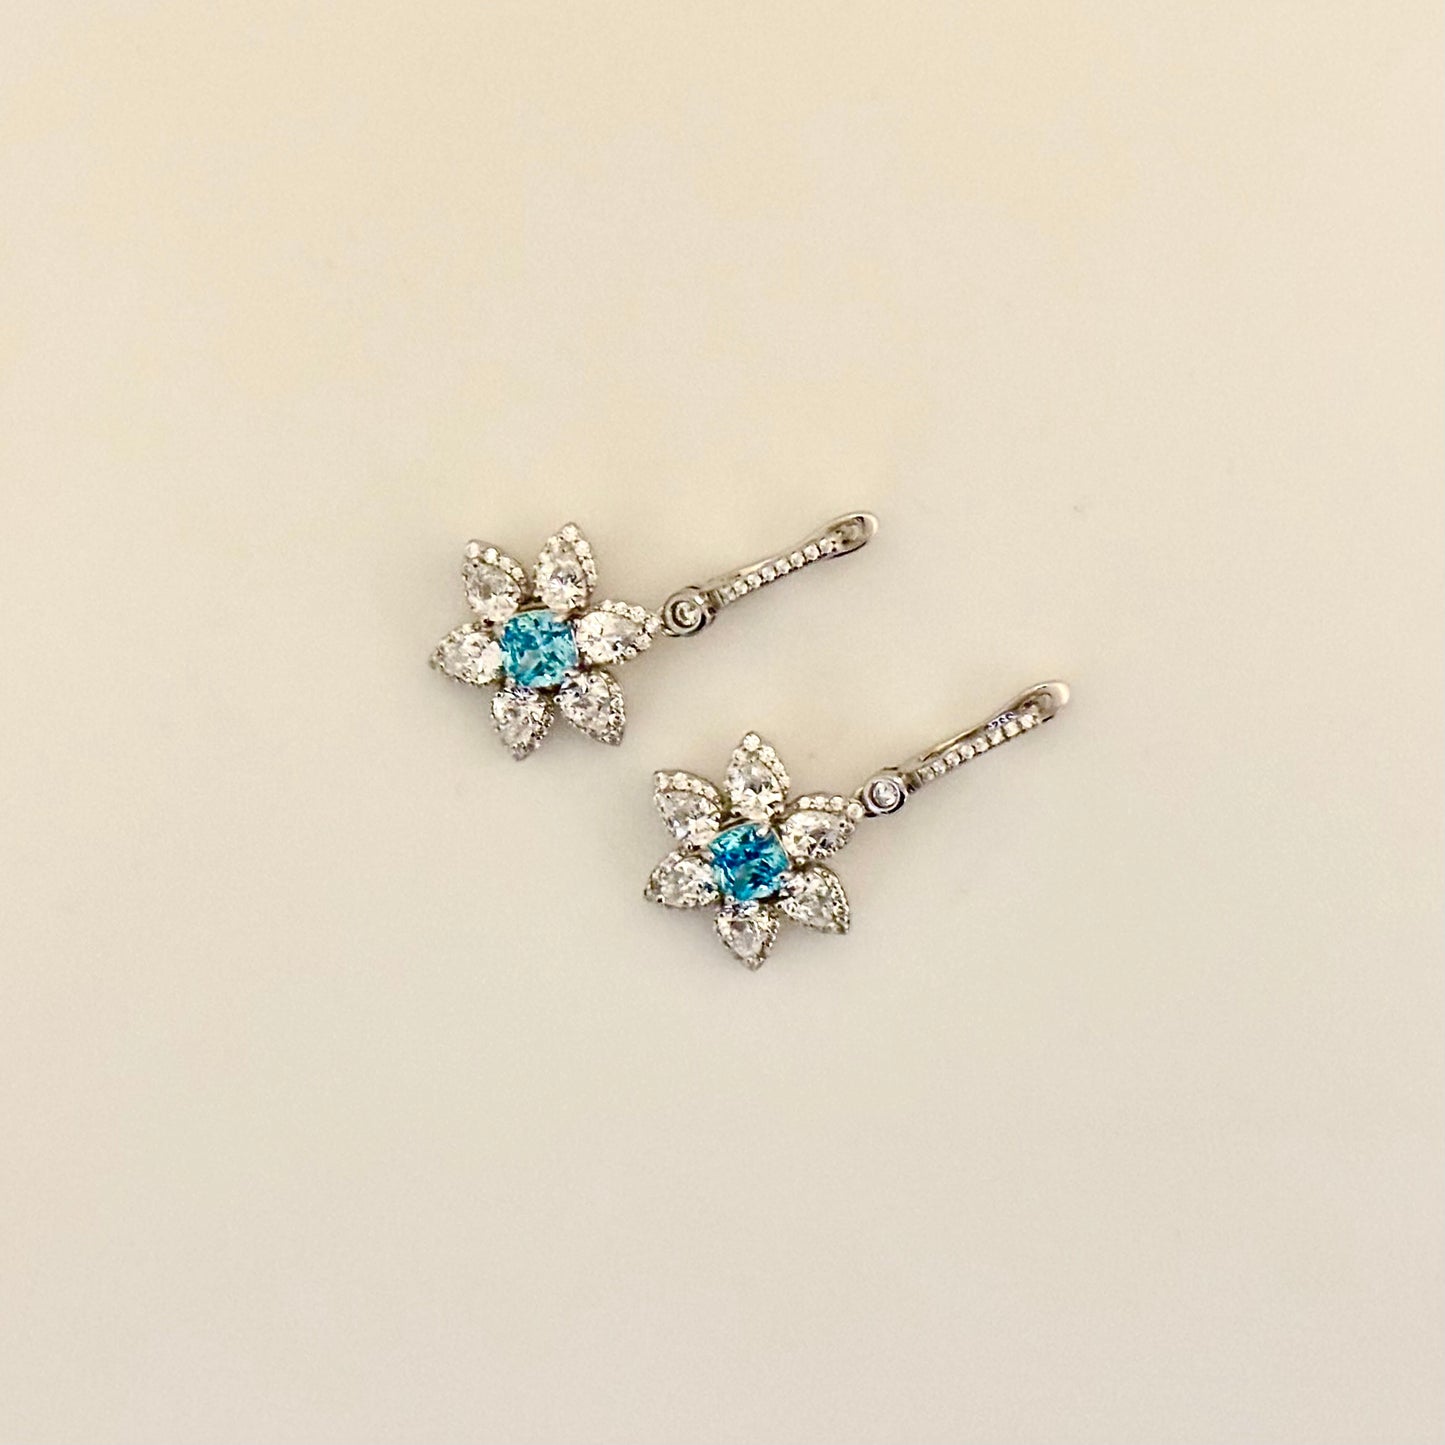 Blue and Clear CZ Flower Earrings